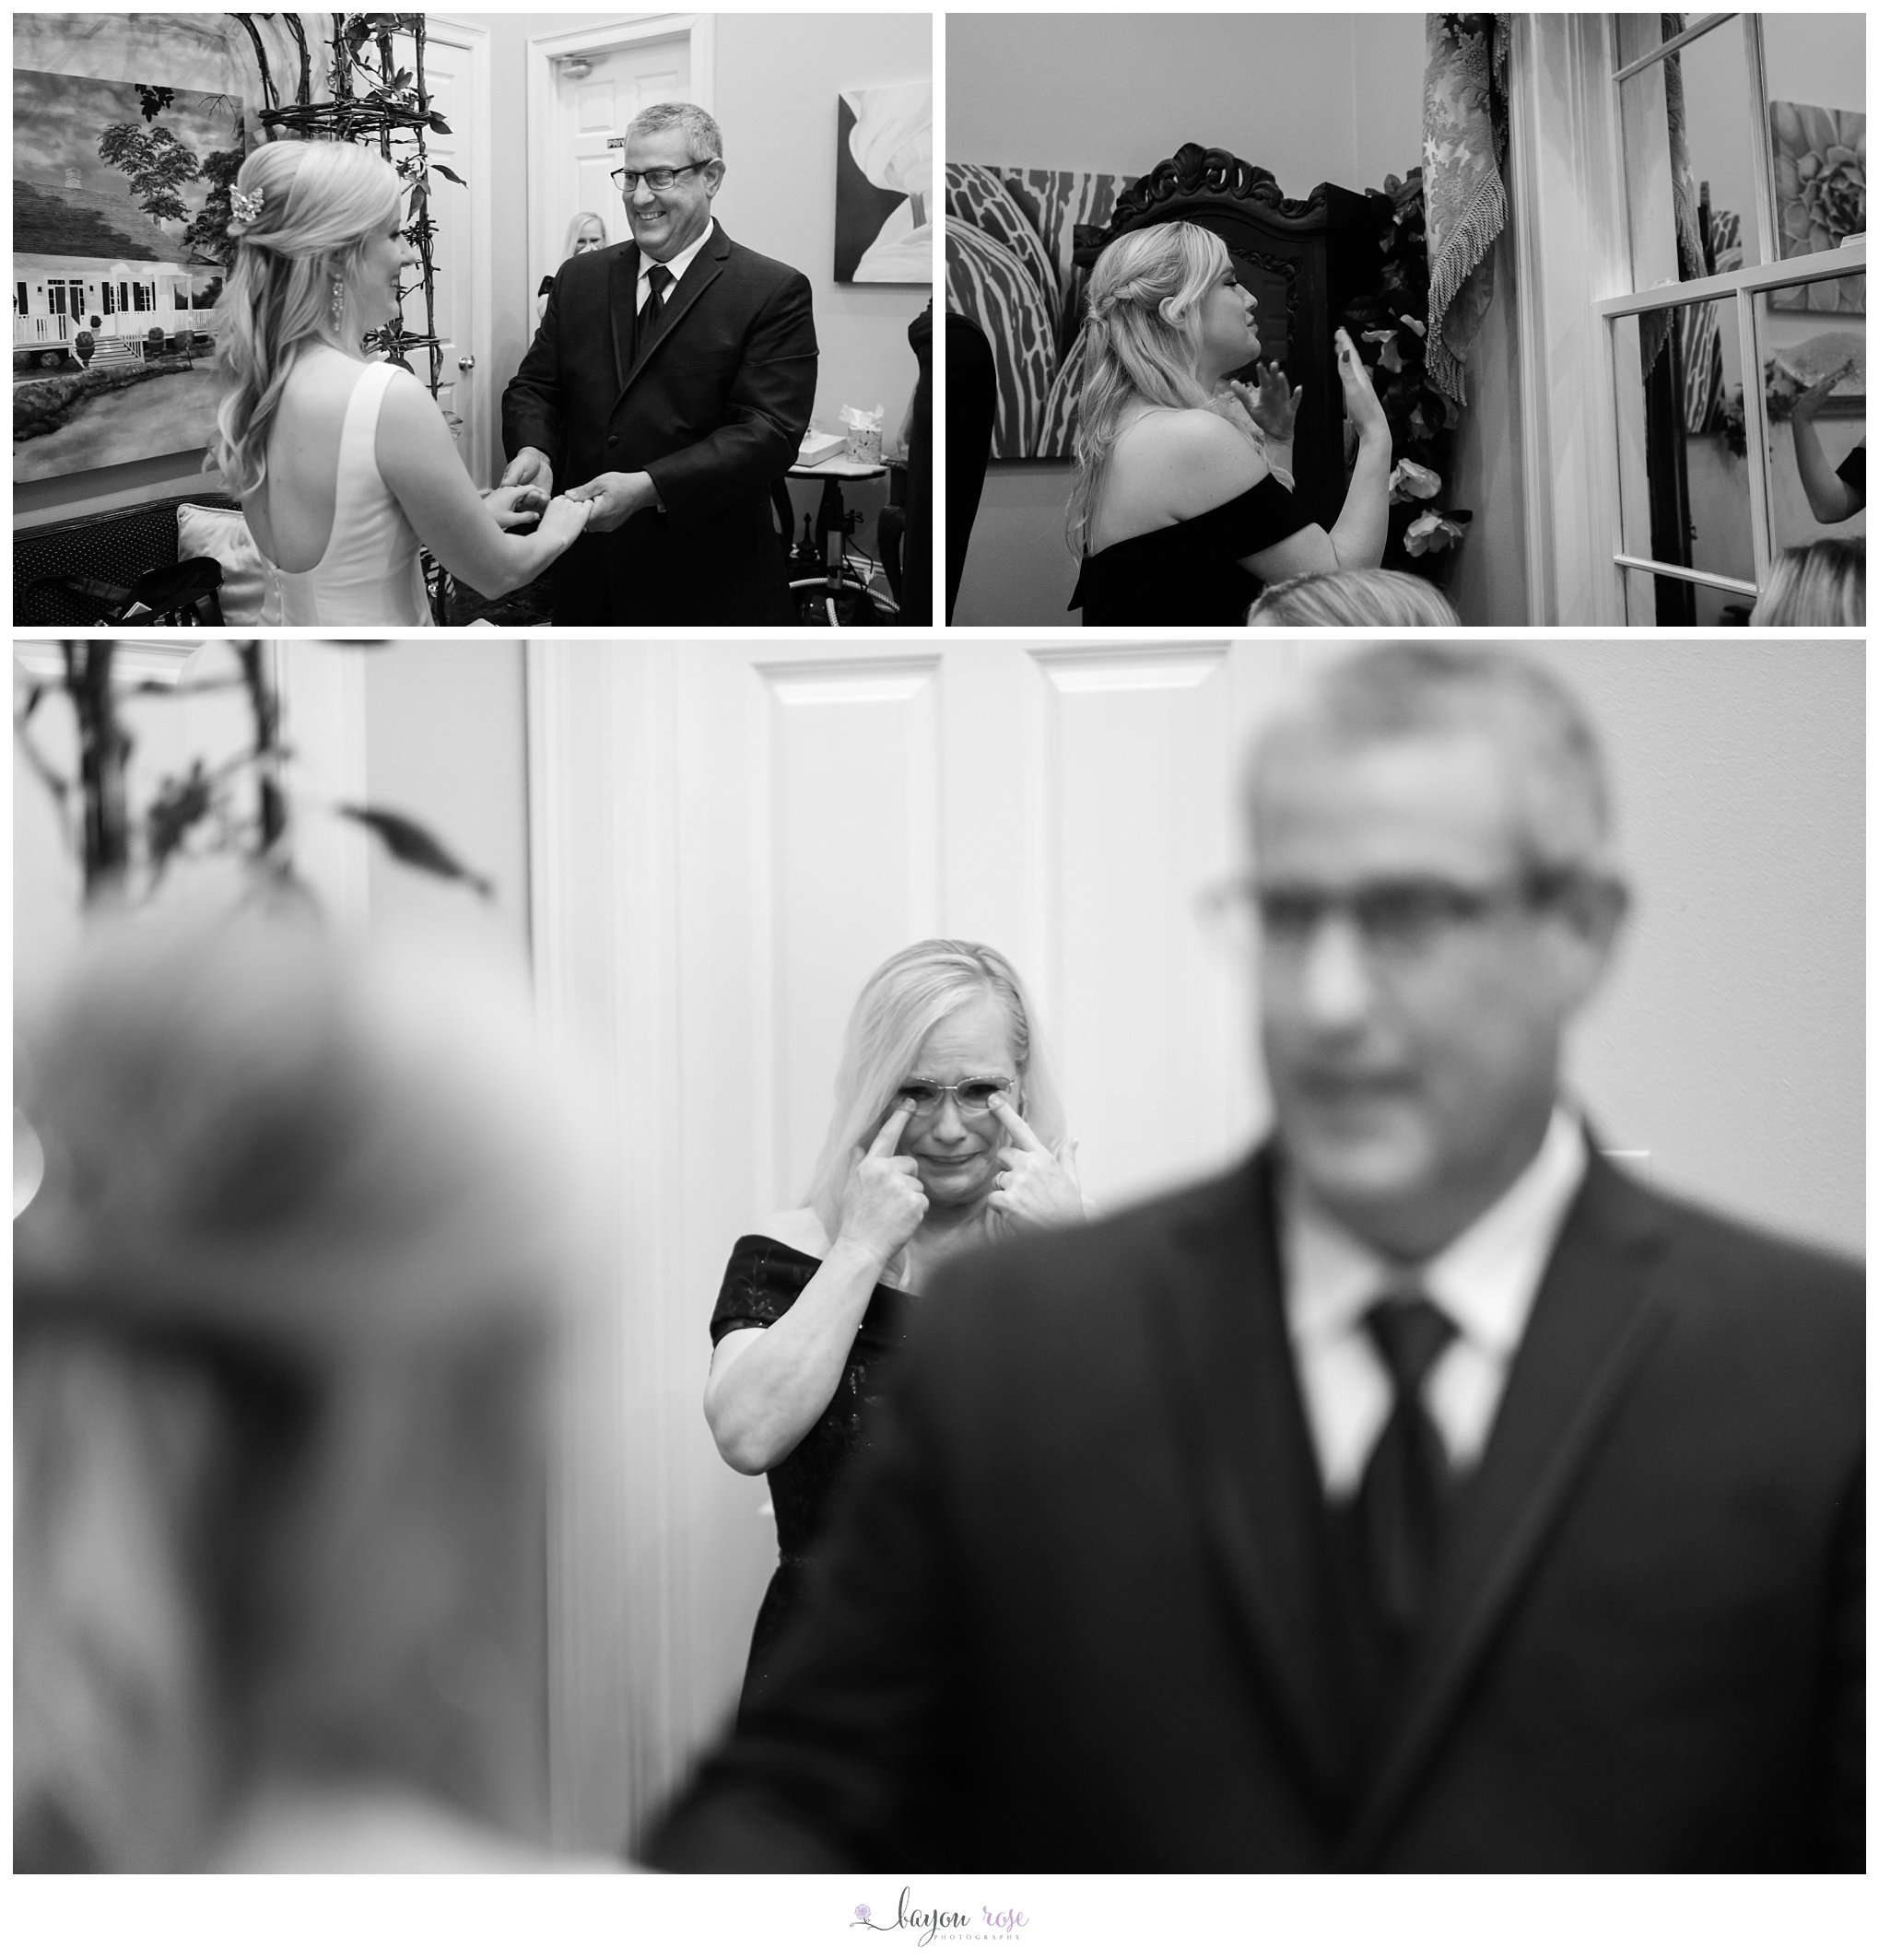 Emotional first look photos on wedding day with dad and sister